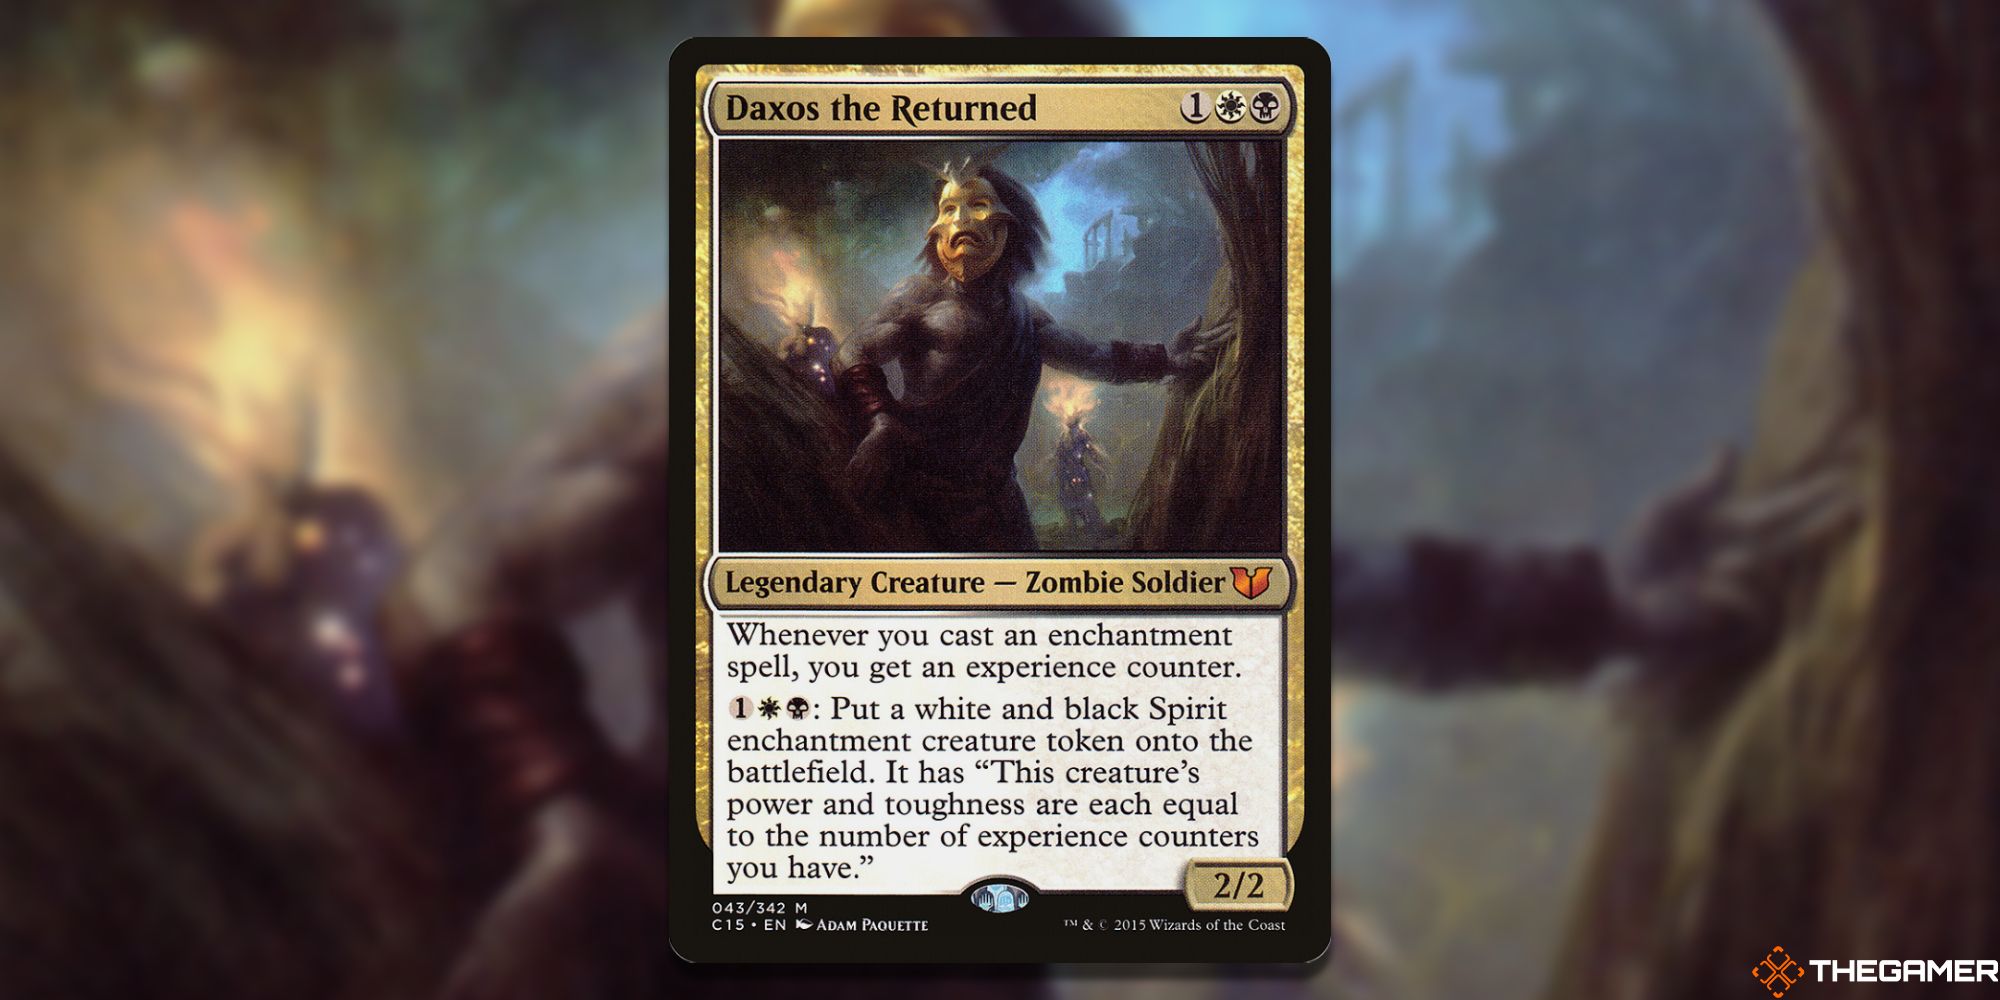 Image of the Daxos the Returned card in Magic: The Gathering, with art by Adam Paouette